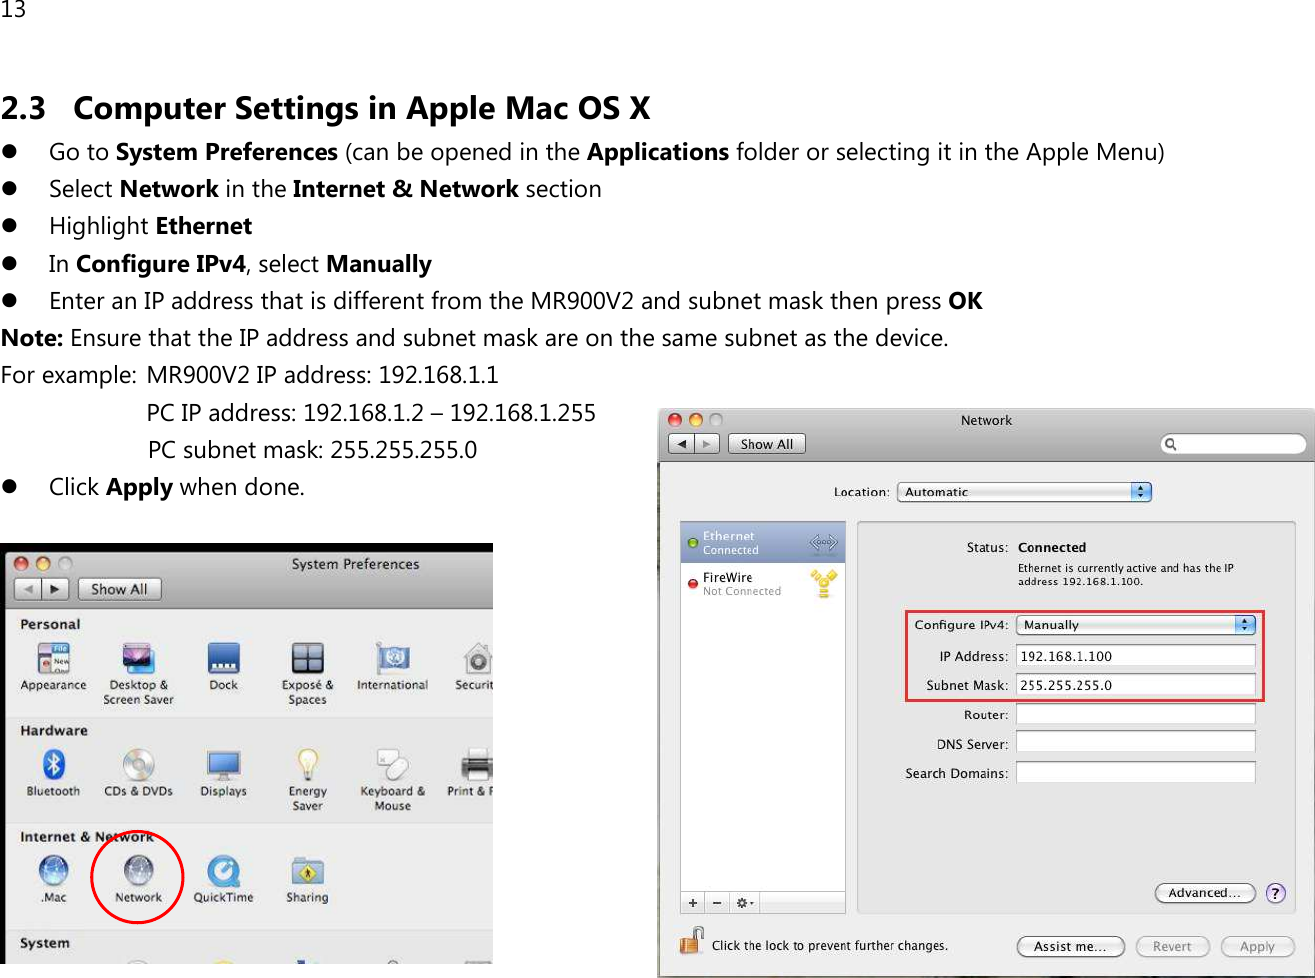 13  2.3 Computer Settings in Apple Mac OS X  Go to System Preferences (can be opened in the Applications folder or selecting it in the Apple Menu)  Select Network in the Internet &amp; Network section  Highlight Ethernet  In Configure IPv4, select Manually  Enter an IP address that is different from the MR900V2 and subnet mask then press OK Note: Ensure that the IP address and subnet mask are on the same subnet as the device.   For example:  MR900V2 IP address: 192.168.1.1 PC IP address: 192.168.1.2 – 192.168.1.255   PC subnet mask: 255.255.255.0  Click Apply when done.   